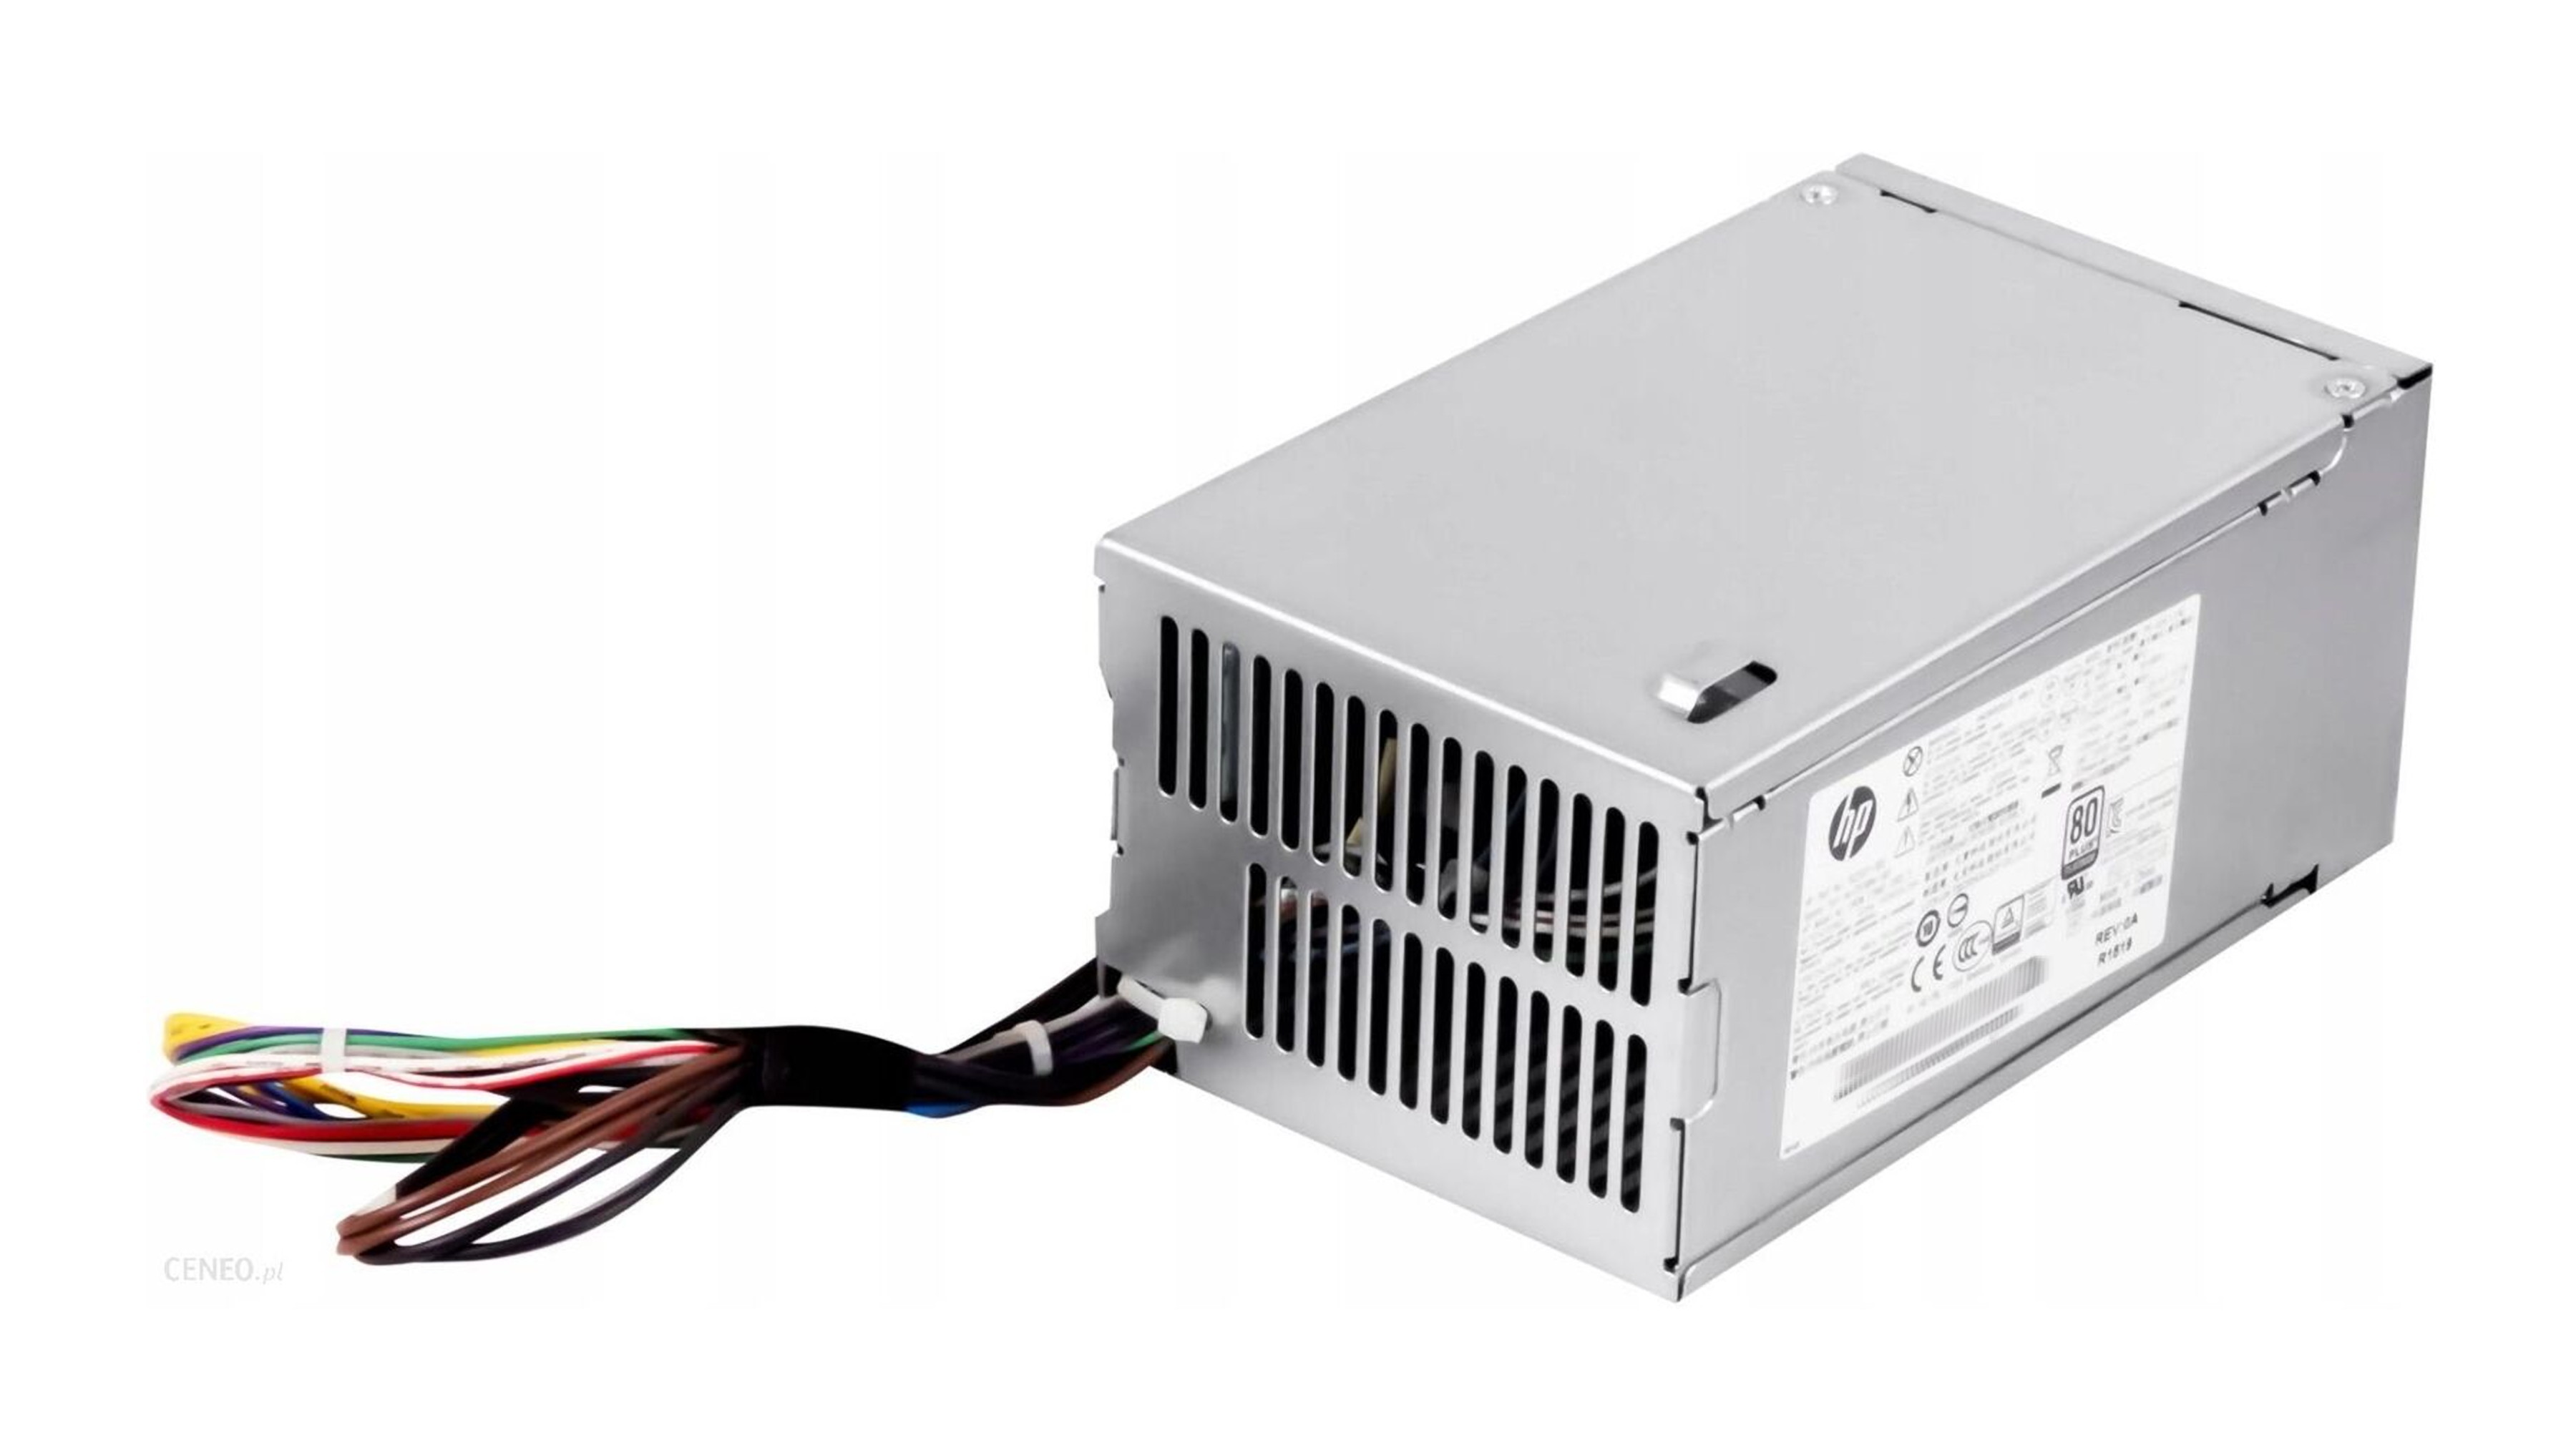 HP Power Supply PS-4241-1 HC 751884-001 702307-002 240W ProDesk 800 z230 z240 - Click Image to Close